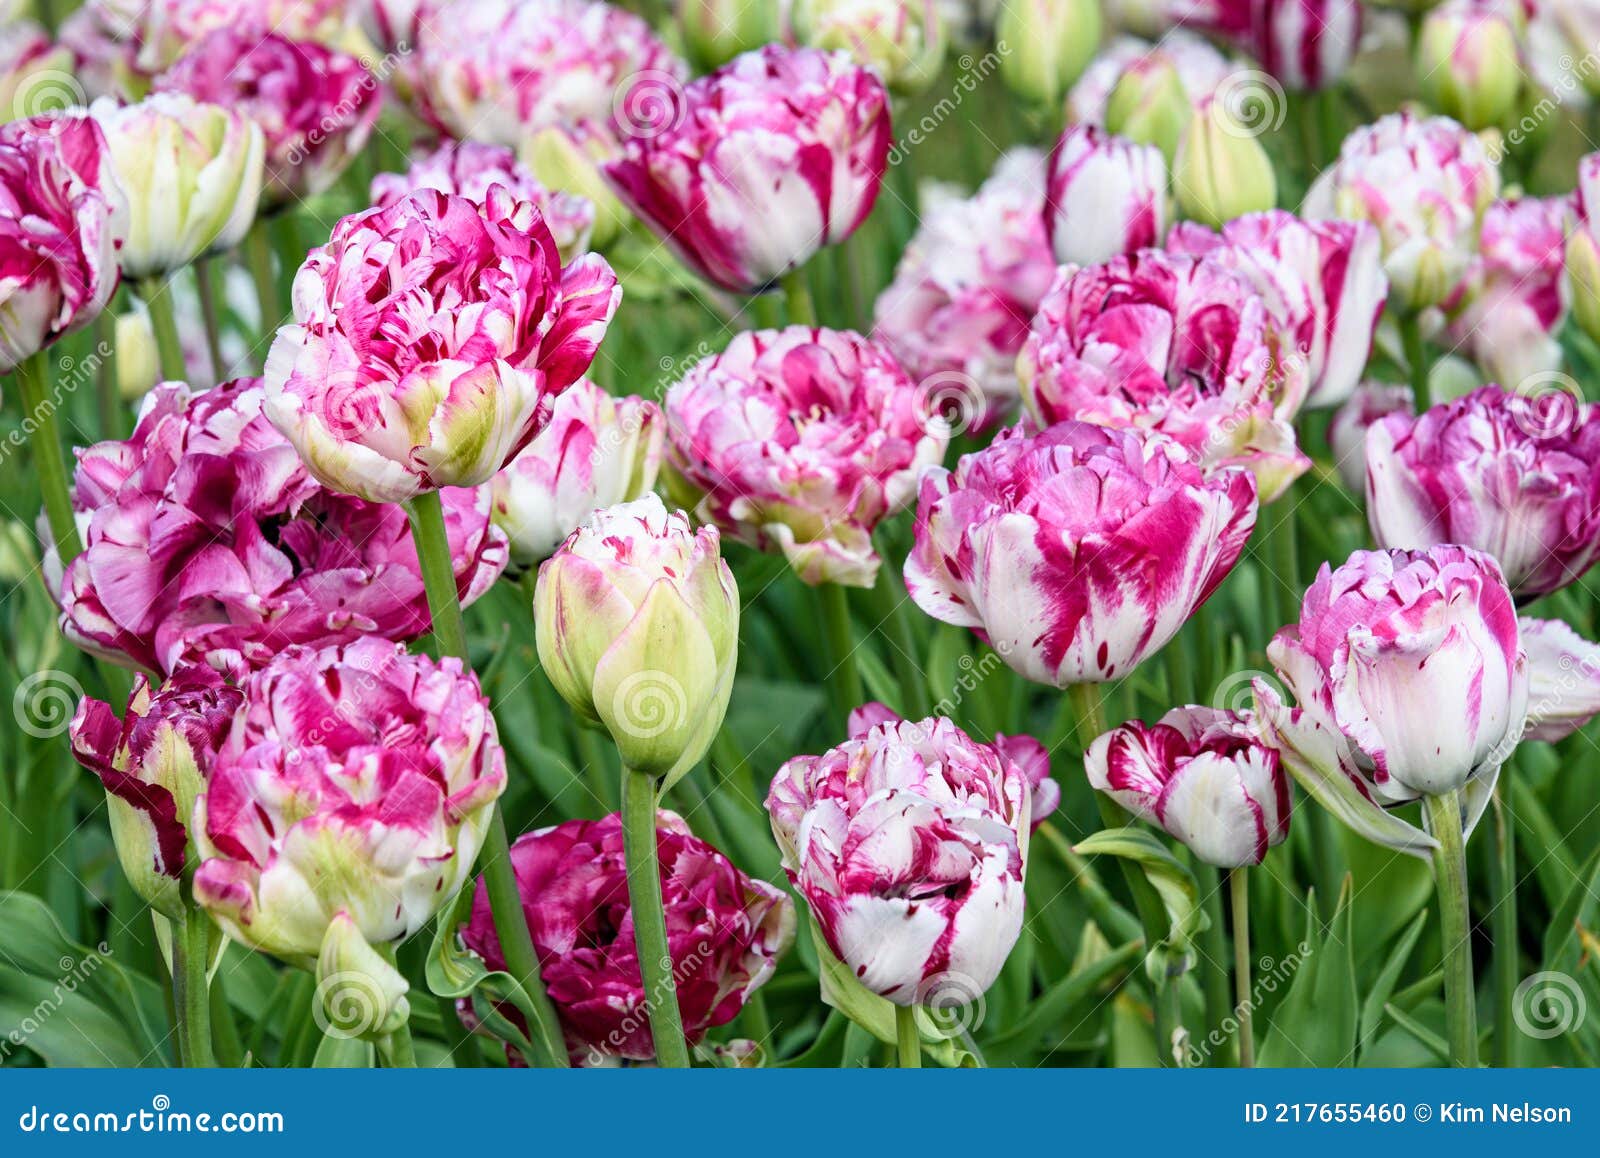 cheerful field of bright pink and white variegated double tulips as a nature background